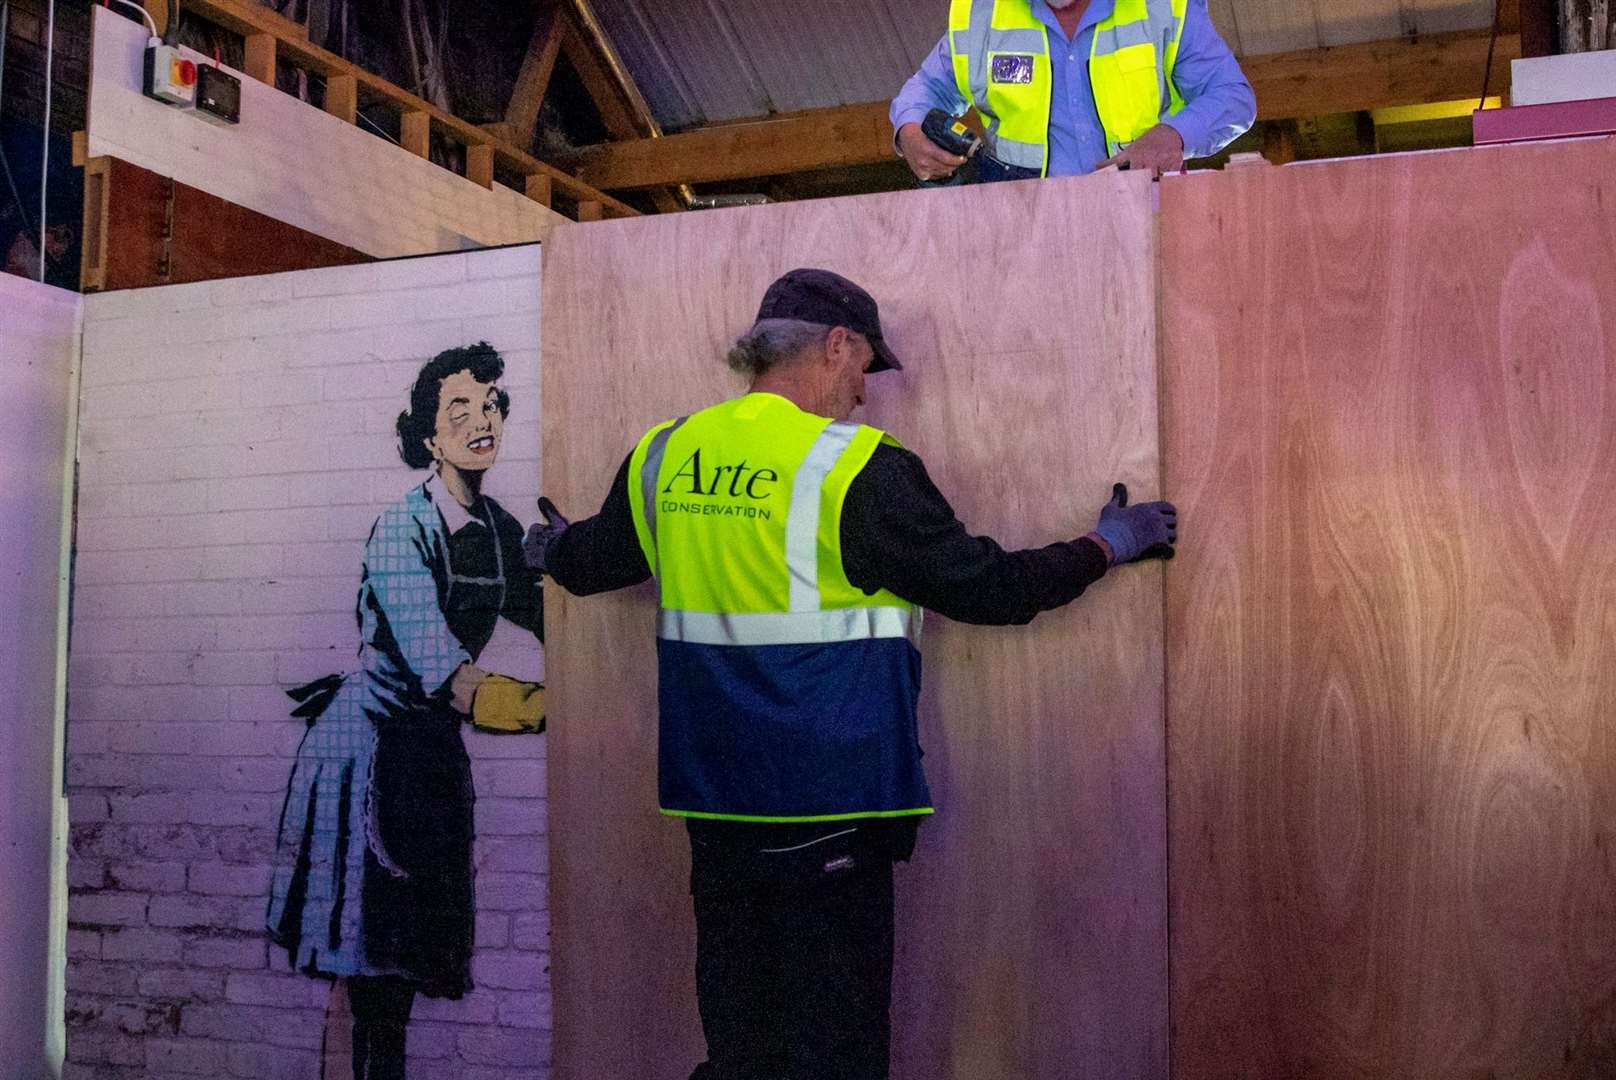 Banksy's piece being assembled at Dreamland in Margate